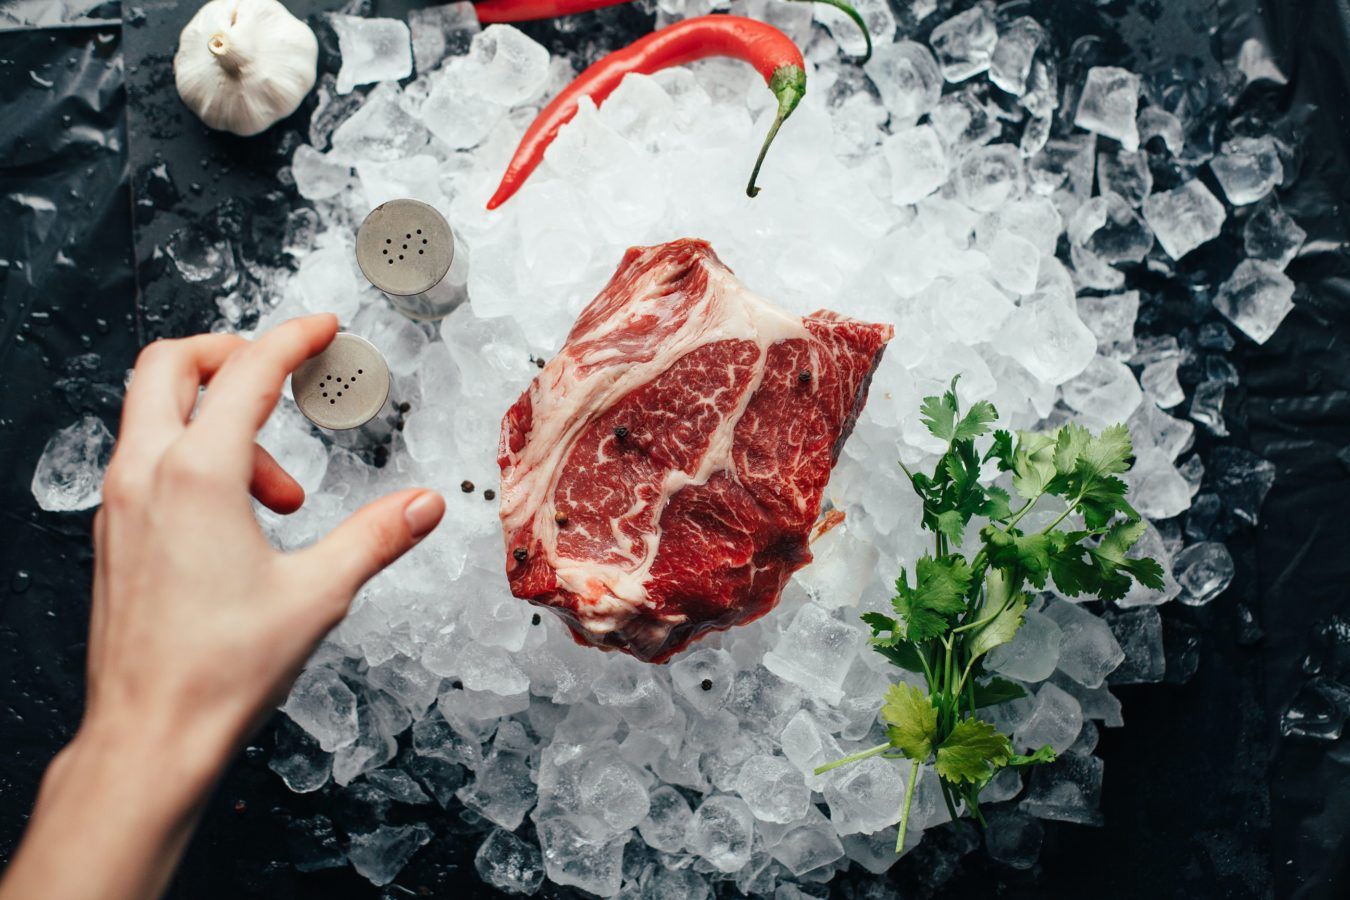 Where to buy meat in Bangkok (premium cuts, cured, or CBD-infused)